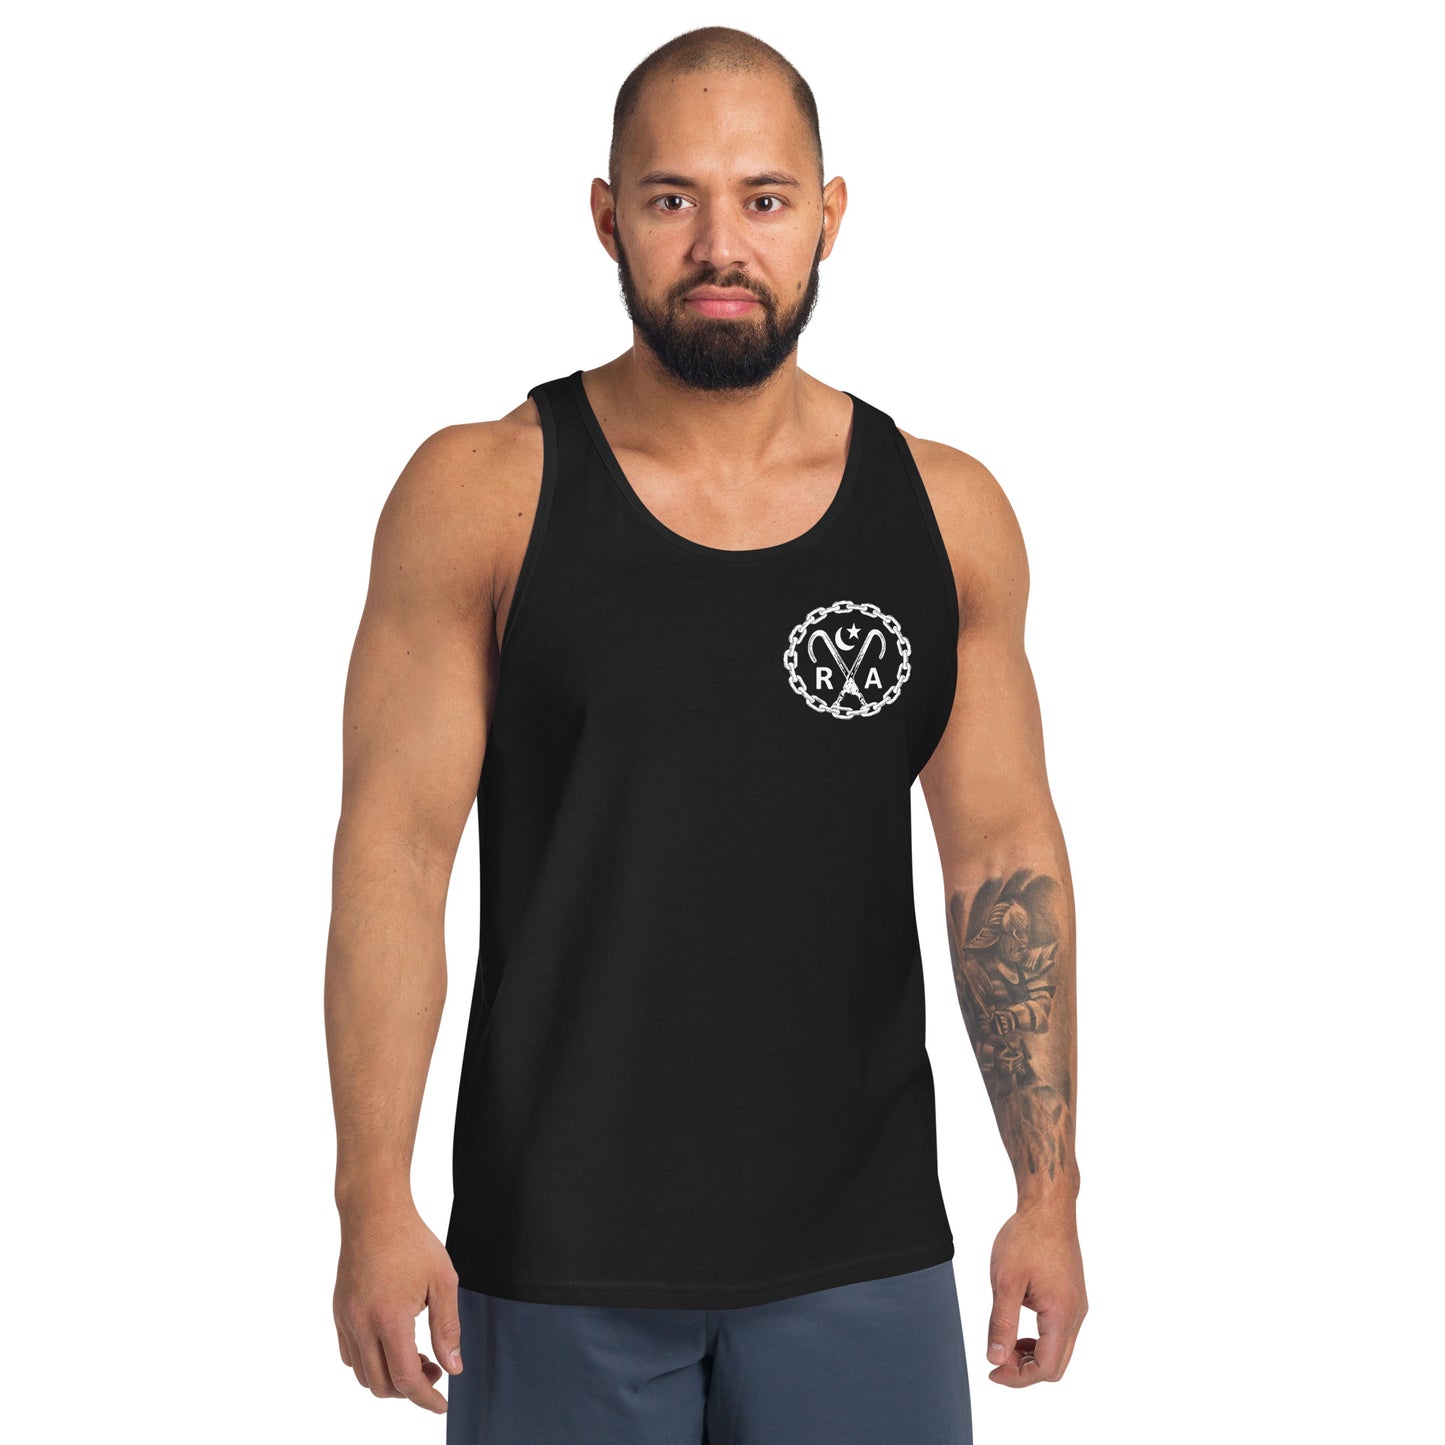 Hook and Chain - Unisex Tank Top